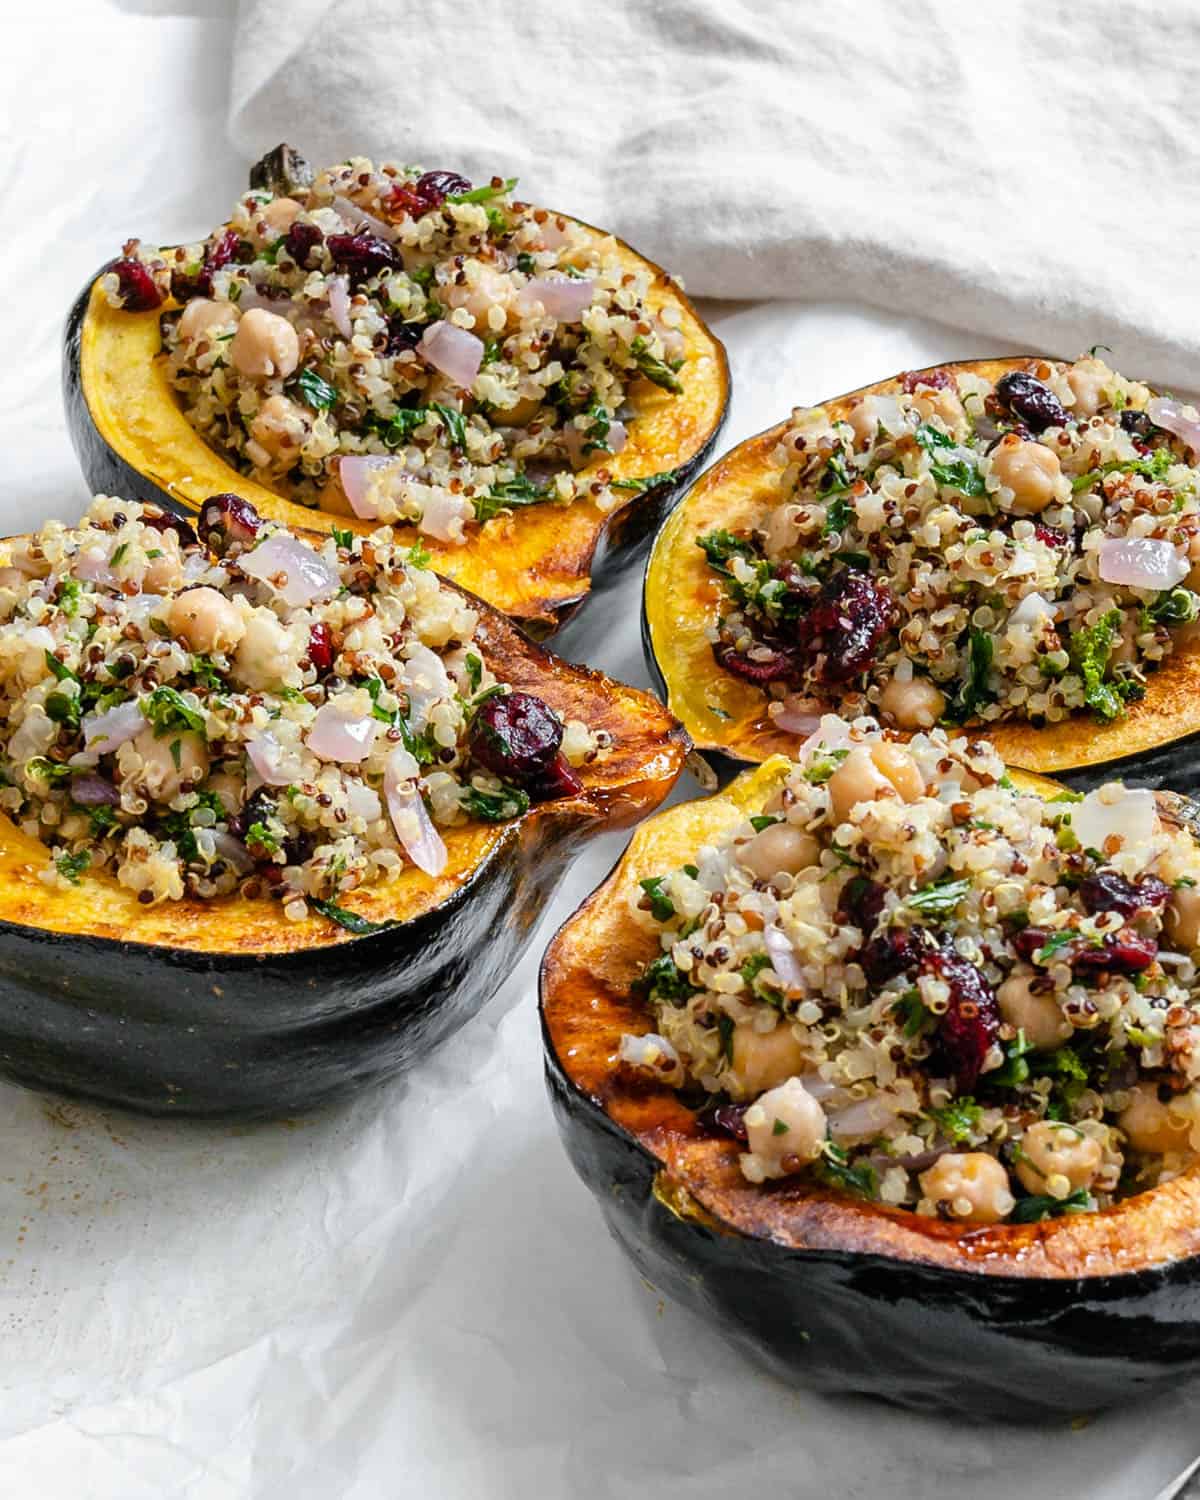 completed Vegan Stuffed Acorn Squash [With Quinoa] on a baking dish